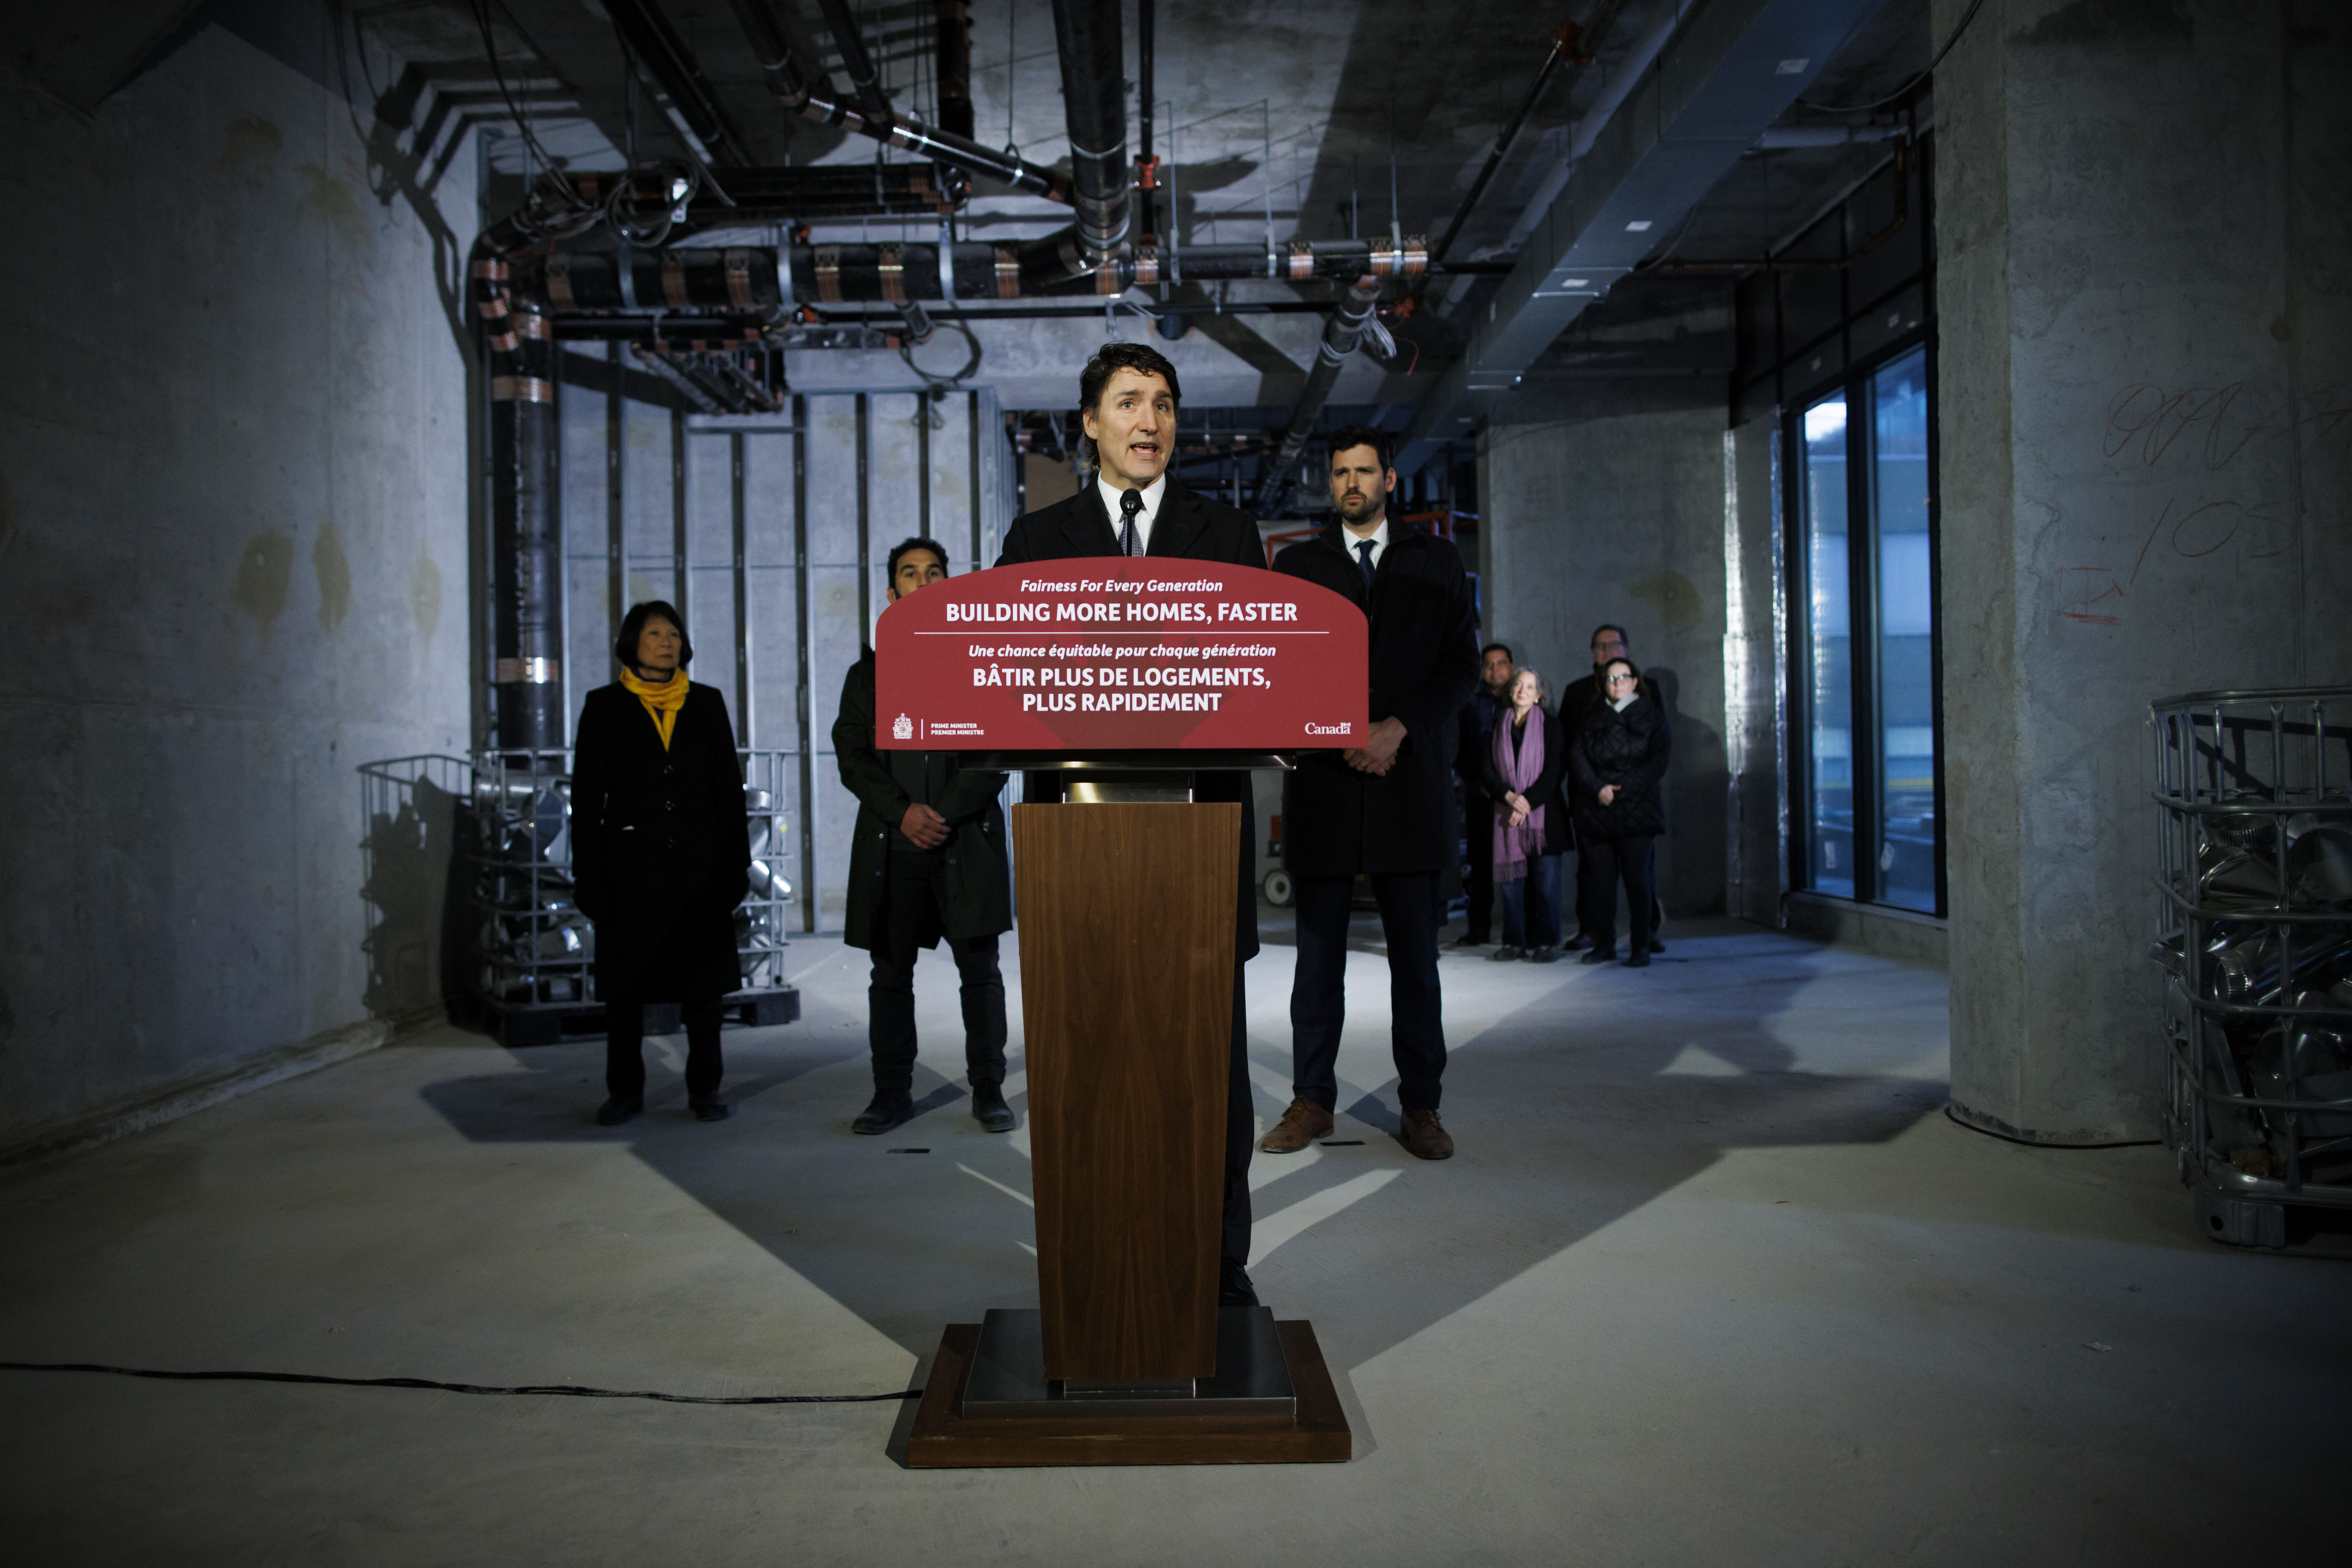 Trudeau pitches apartment building push with $15B more in loans